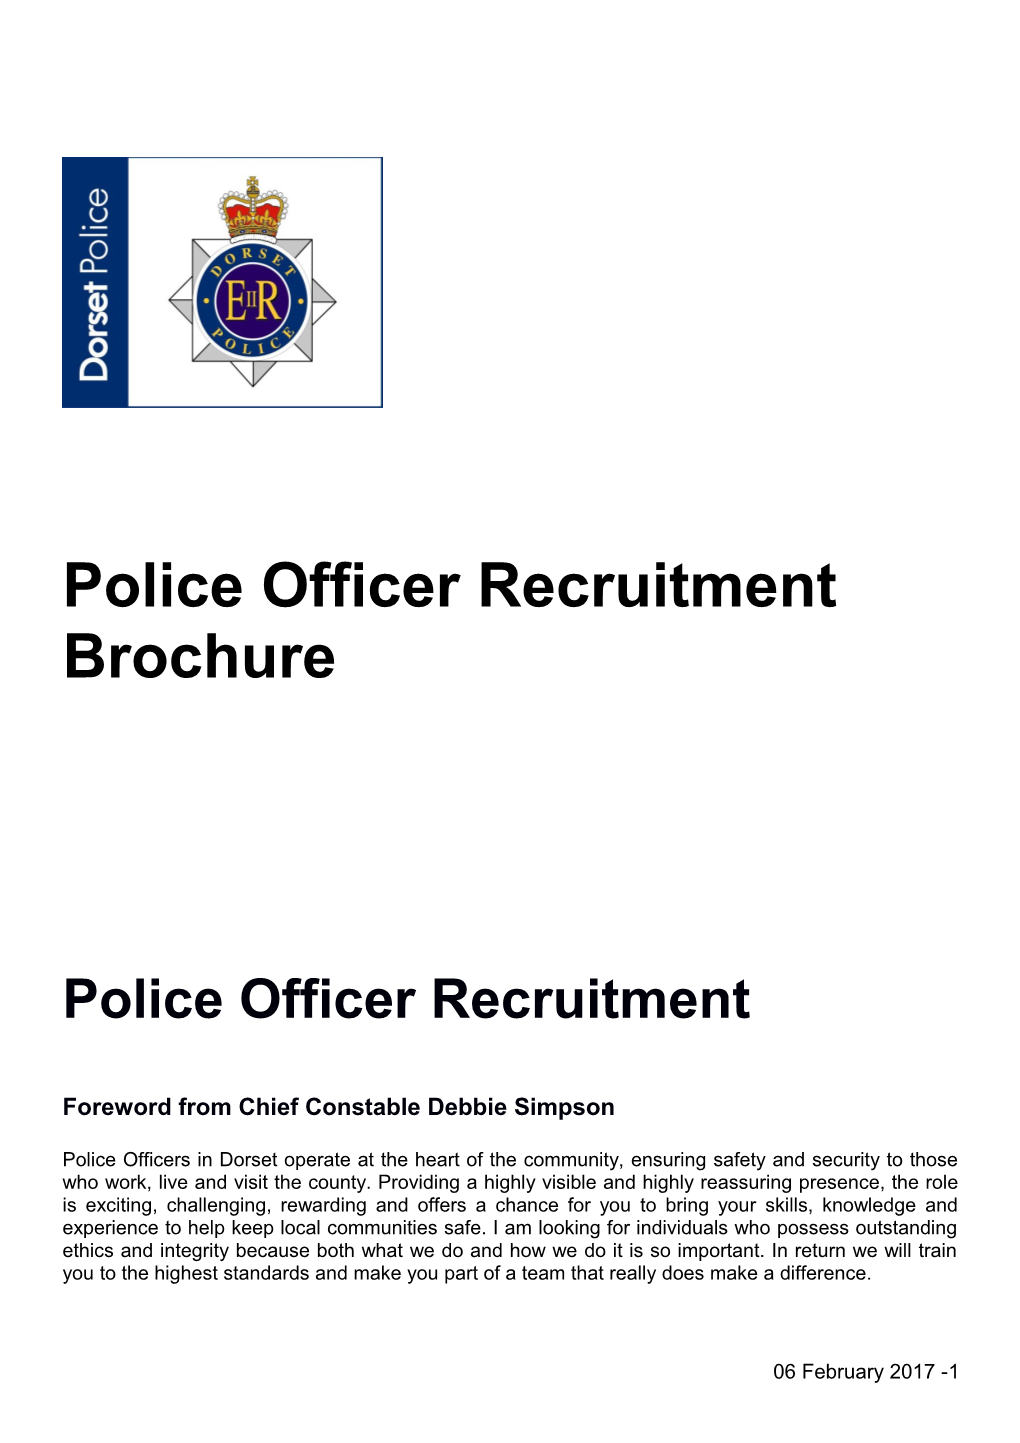 Foreword from Chief Constable Debbie Simpson s1